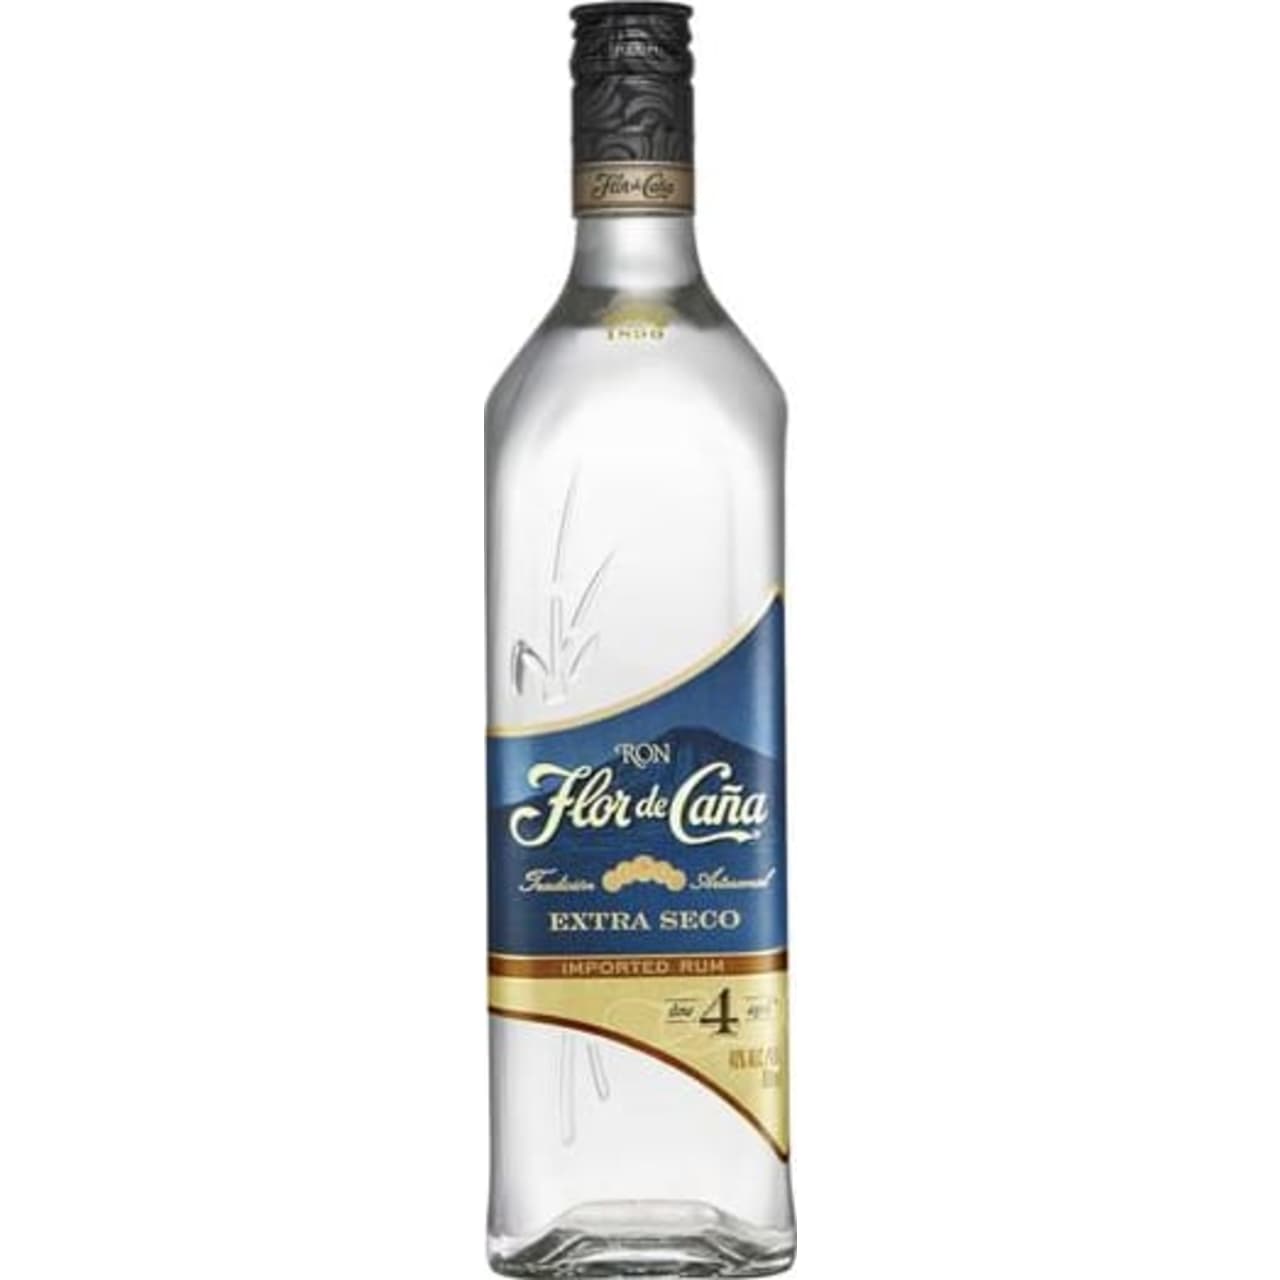 A dry white rum from one of Central America's most celebrated producers, Flor de Caña from Nicaragua, whose reputation for outstanding quality is thoroughly deserved. Notes of sweet almond, vanilla, white chocolate and orange essence.